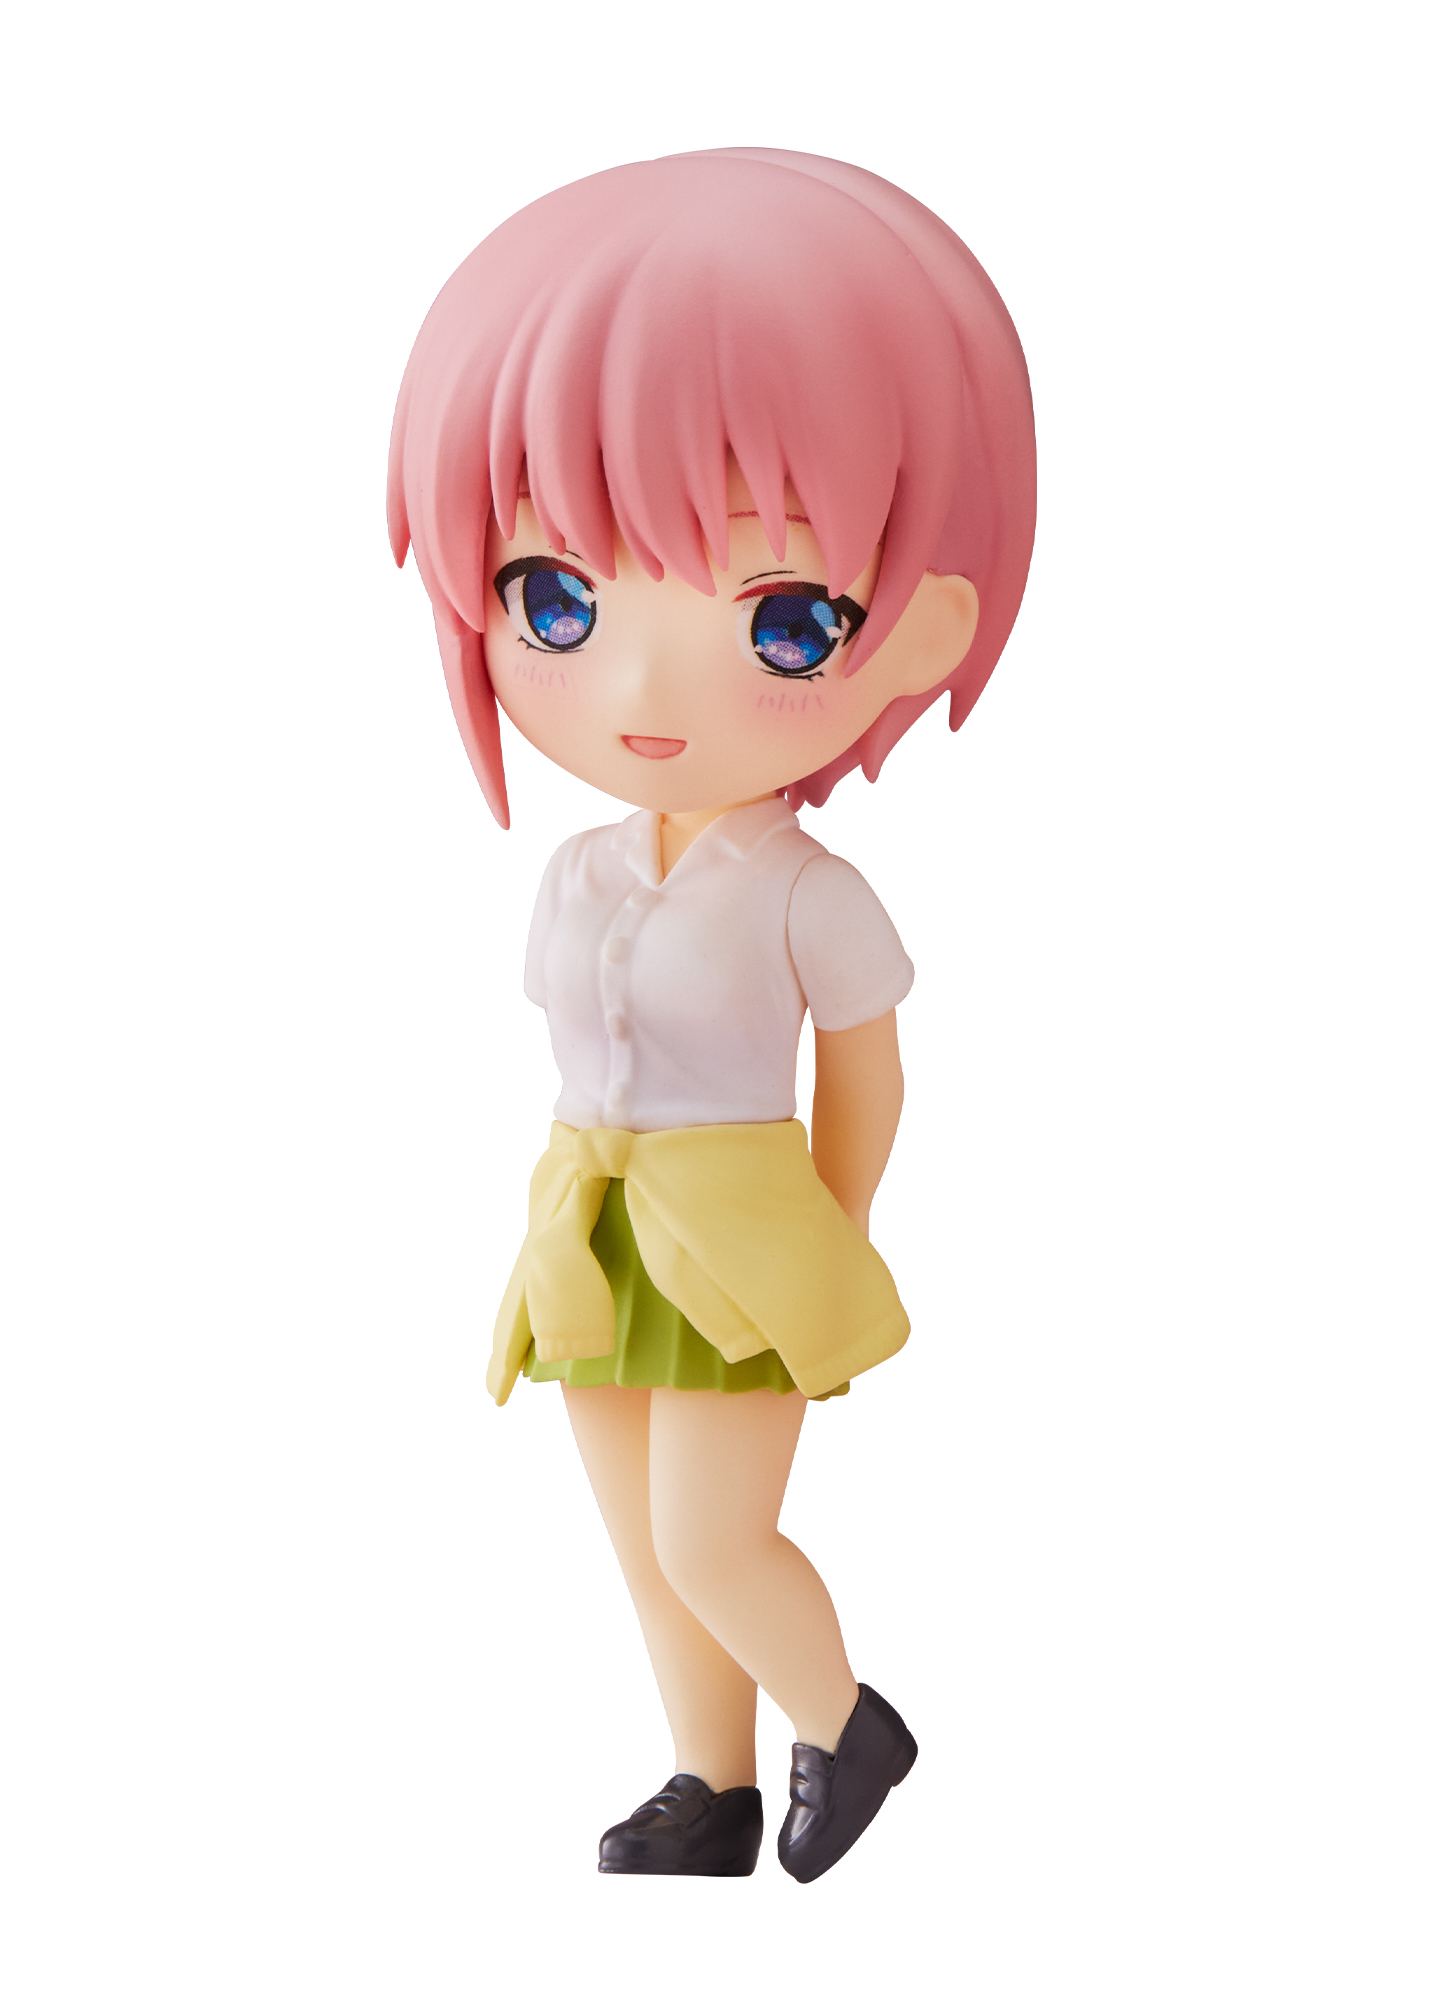 Ichika Nakano – The Eldest of The Quintessential Quintuplets